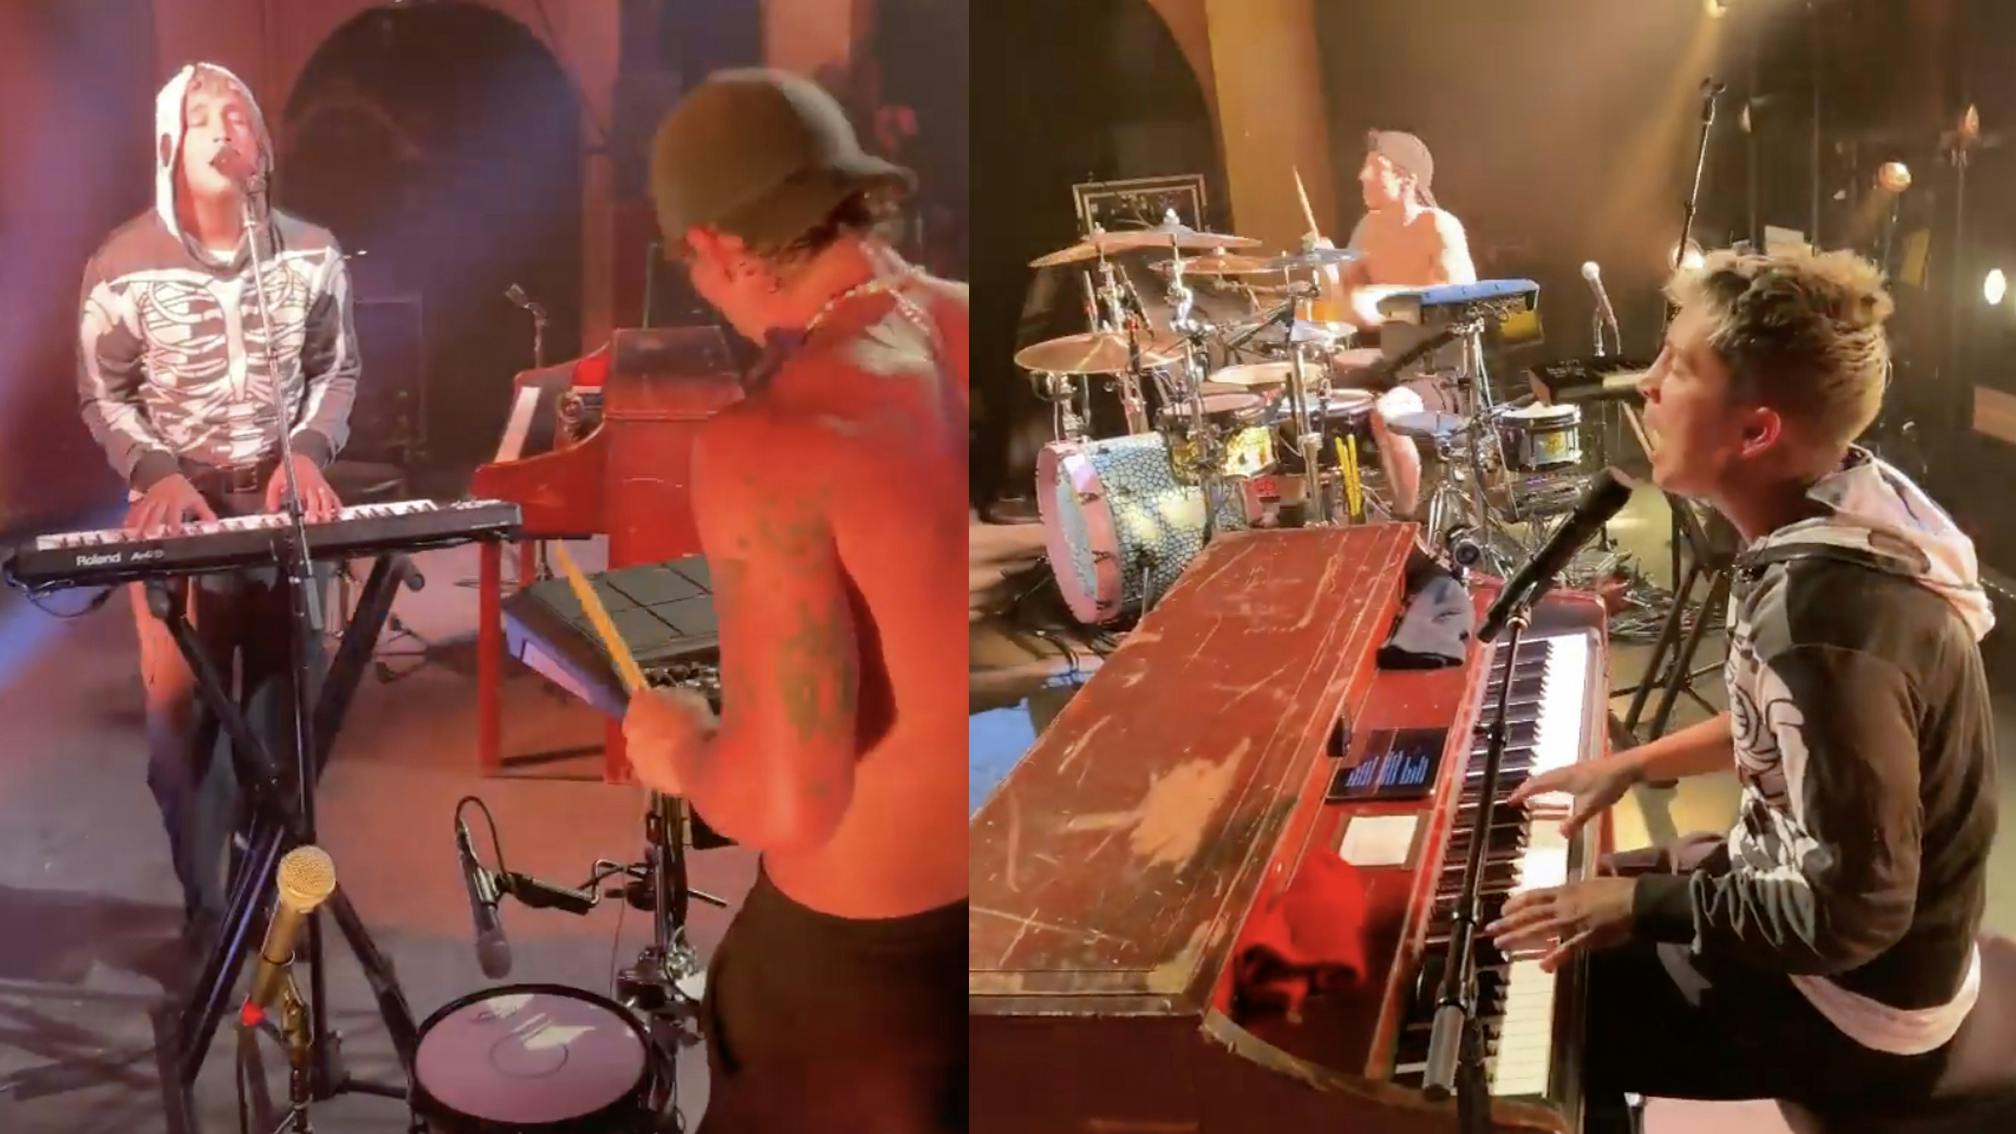 Watch: twenty one pilots perform Vessel songs for first time in years on opening night of Takeøver Tour